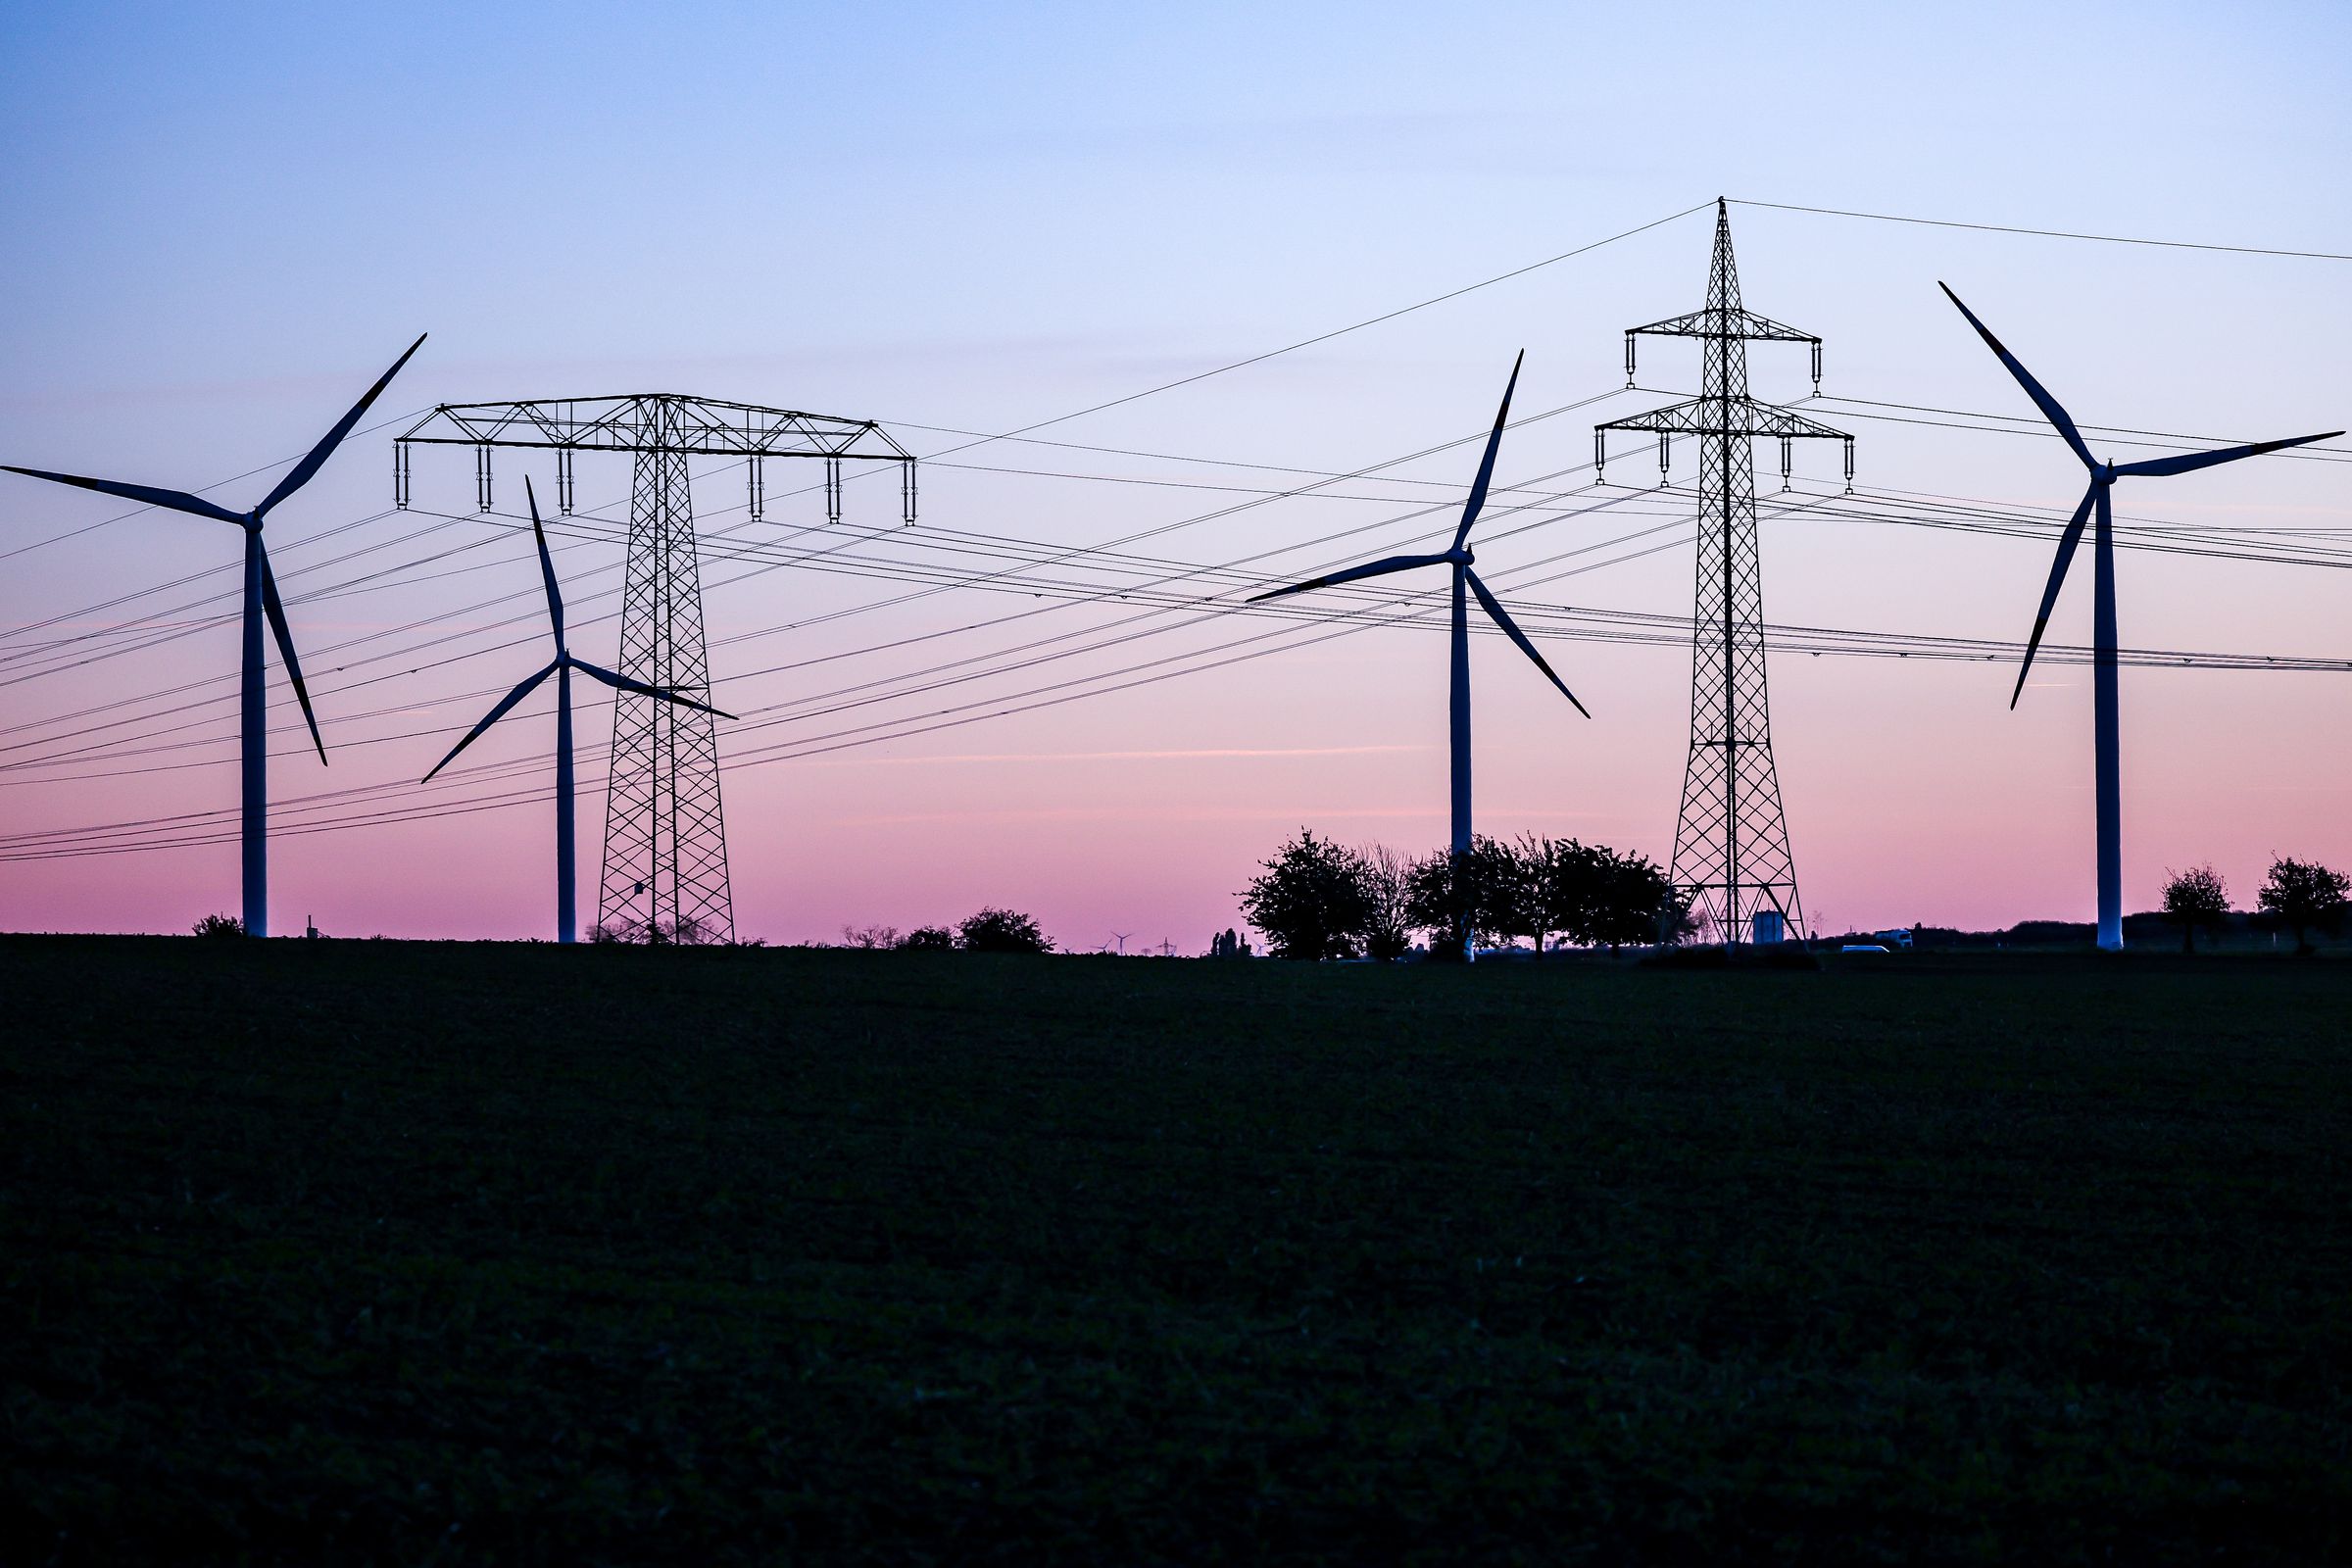 The silhouette of four wind turbines and transmission lines against a sunset.